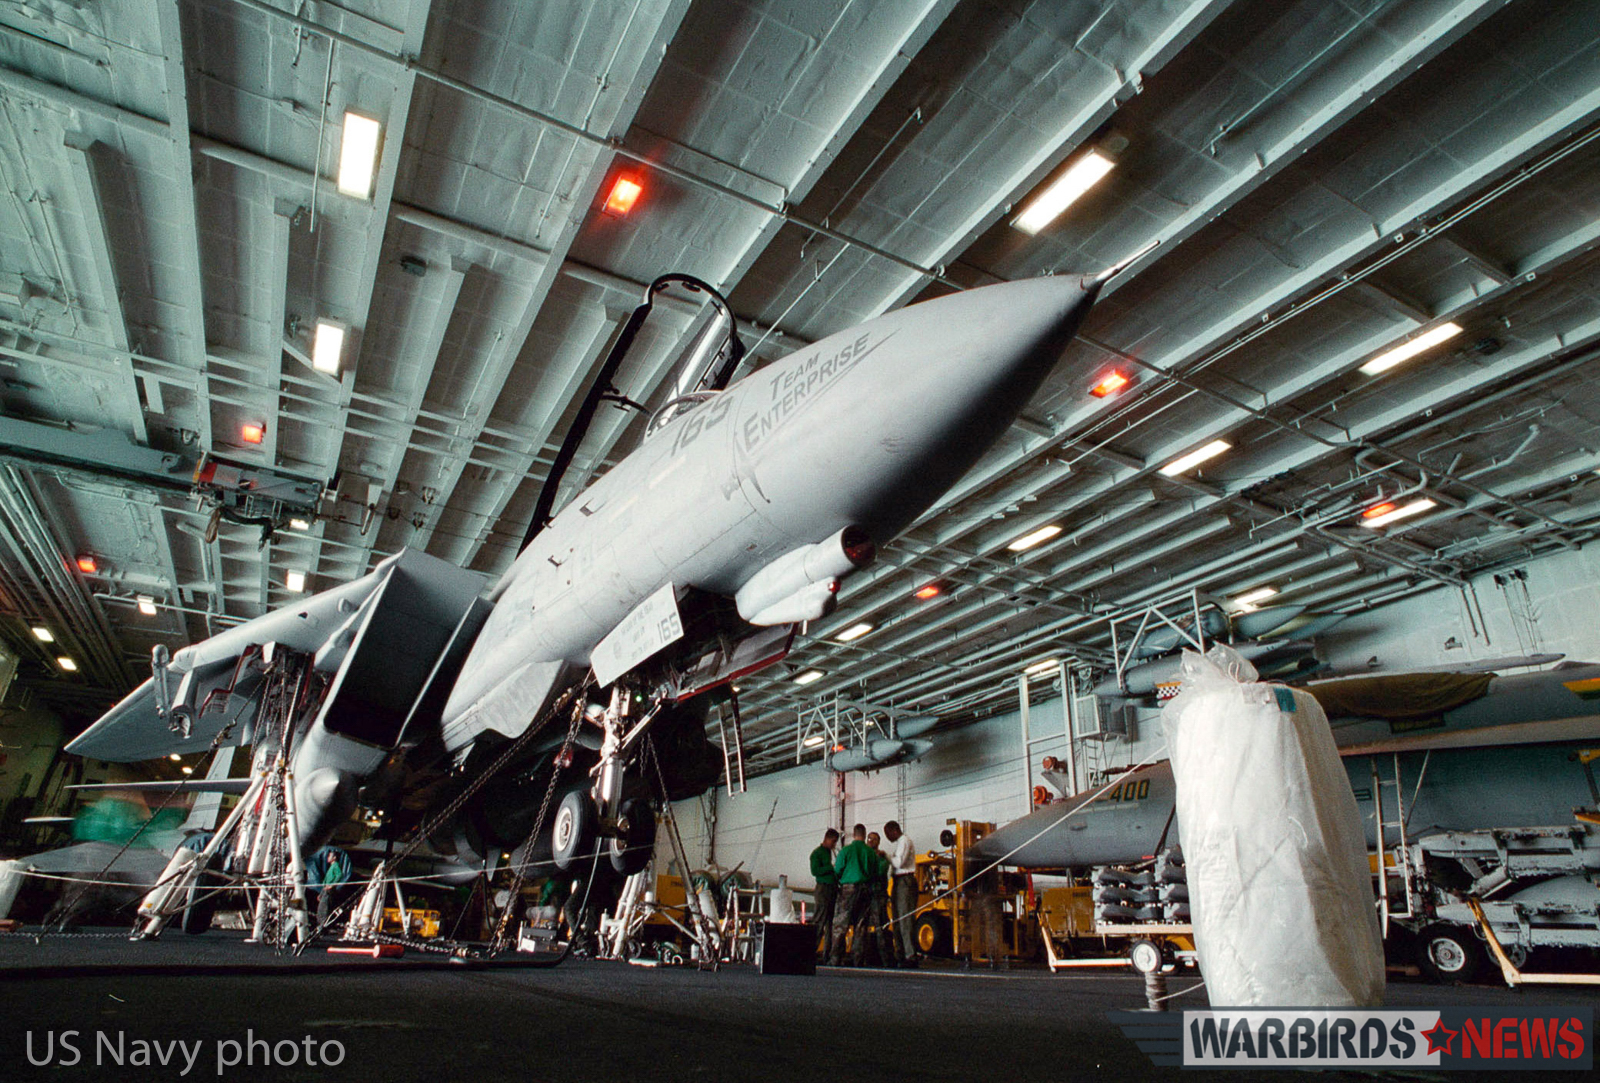 At sea aboard USS Enterprise (CVN 65) (Nov. 6, 1998) -- An F-14 "Tomcat" from Fighter Squadron Thirty Two (VF-32) undergoes a check for proper operation of its landing gear. The USS Enterprise deployed to the Arabian Gulf. U.S. Navy Photo by Photographer's Mate 1st Class Nicholas D. Sherrouse. (RELEASED)